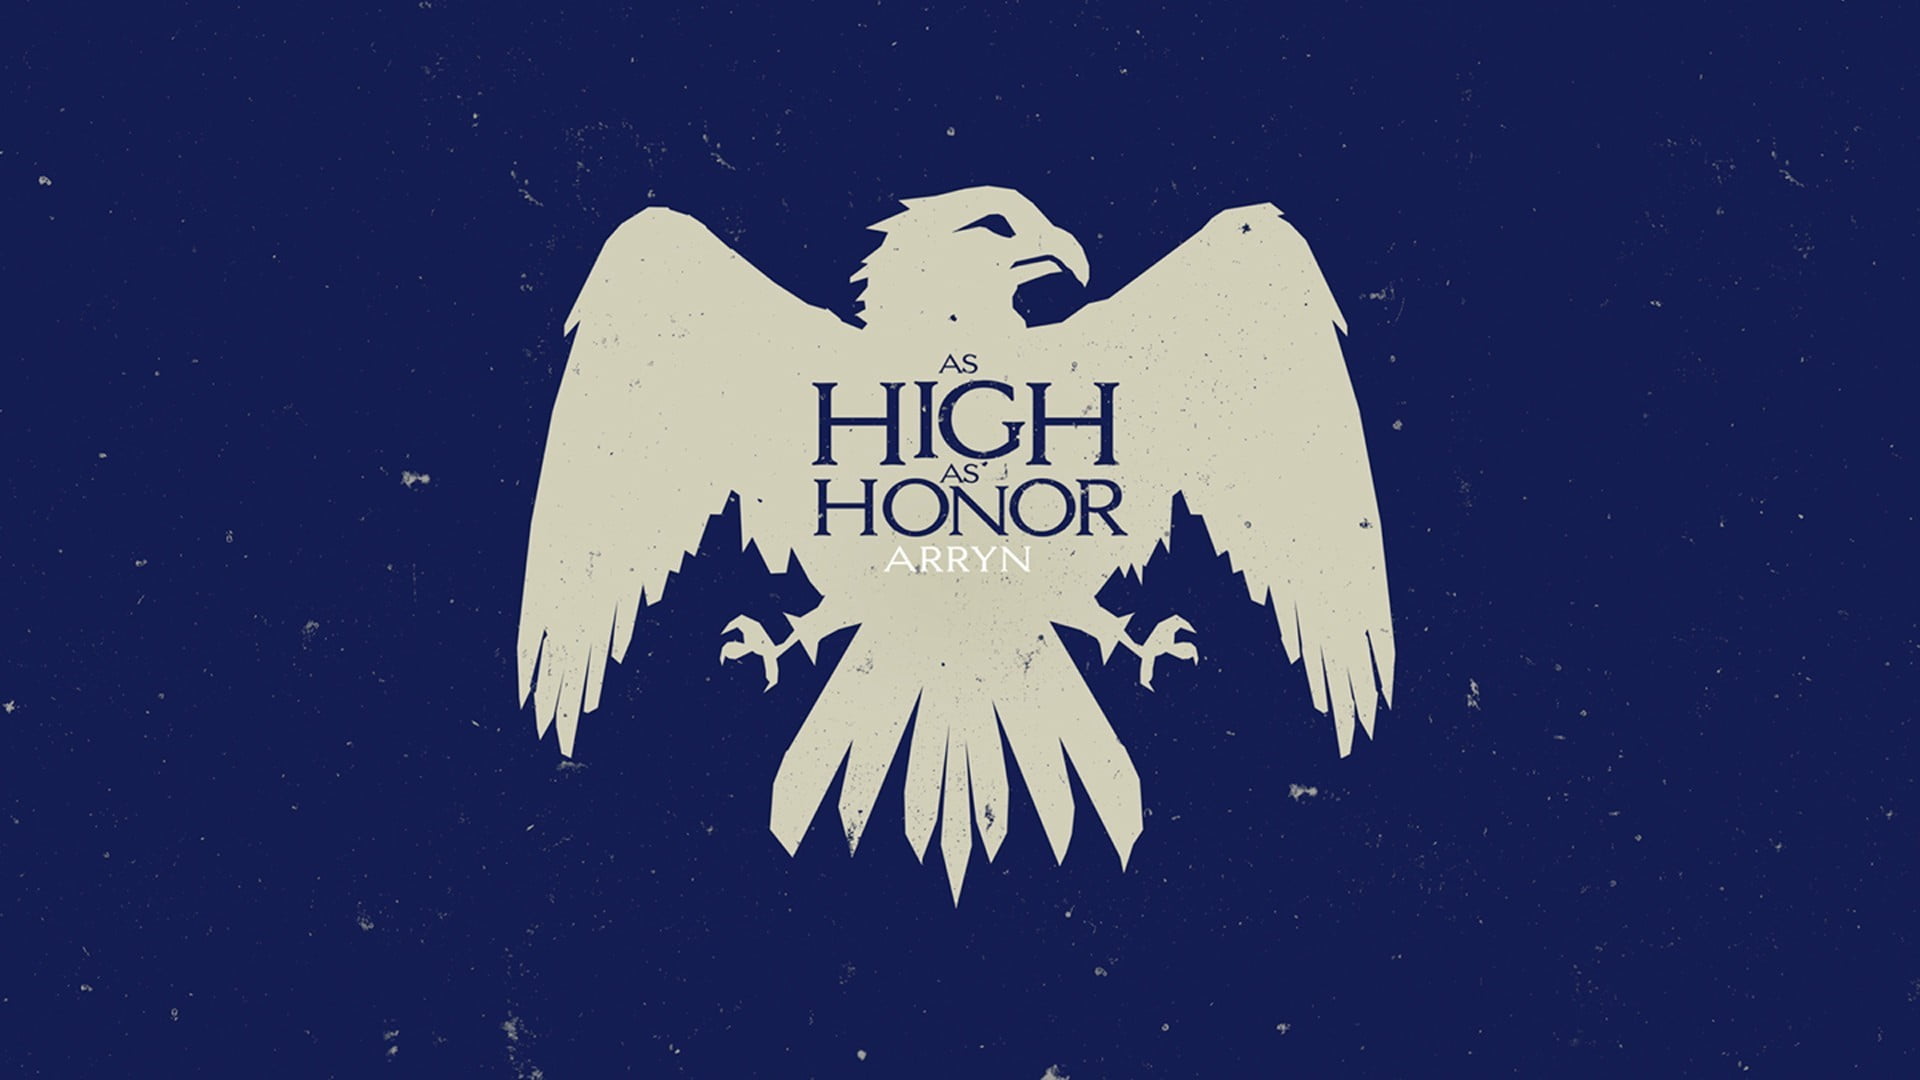 High as Honor eagle poster, Game of Thrones, House Arryn, sigils